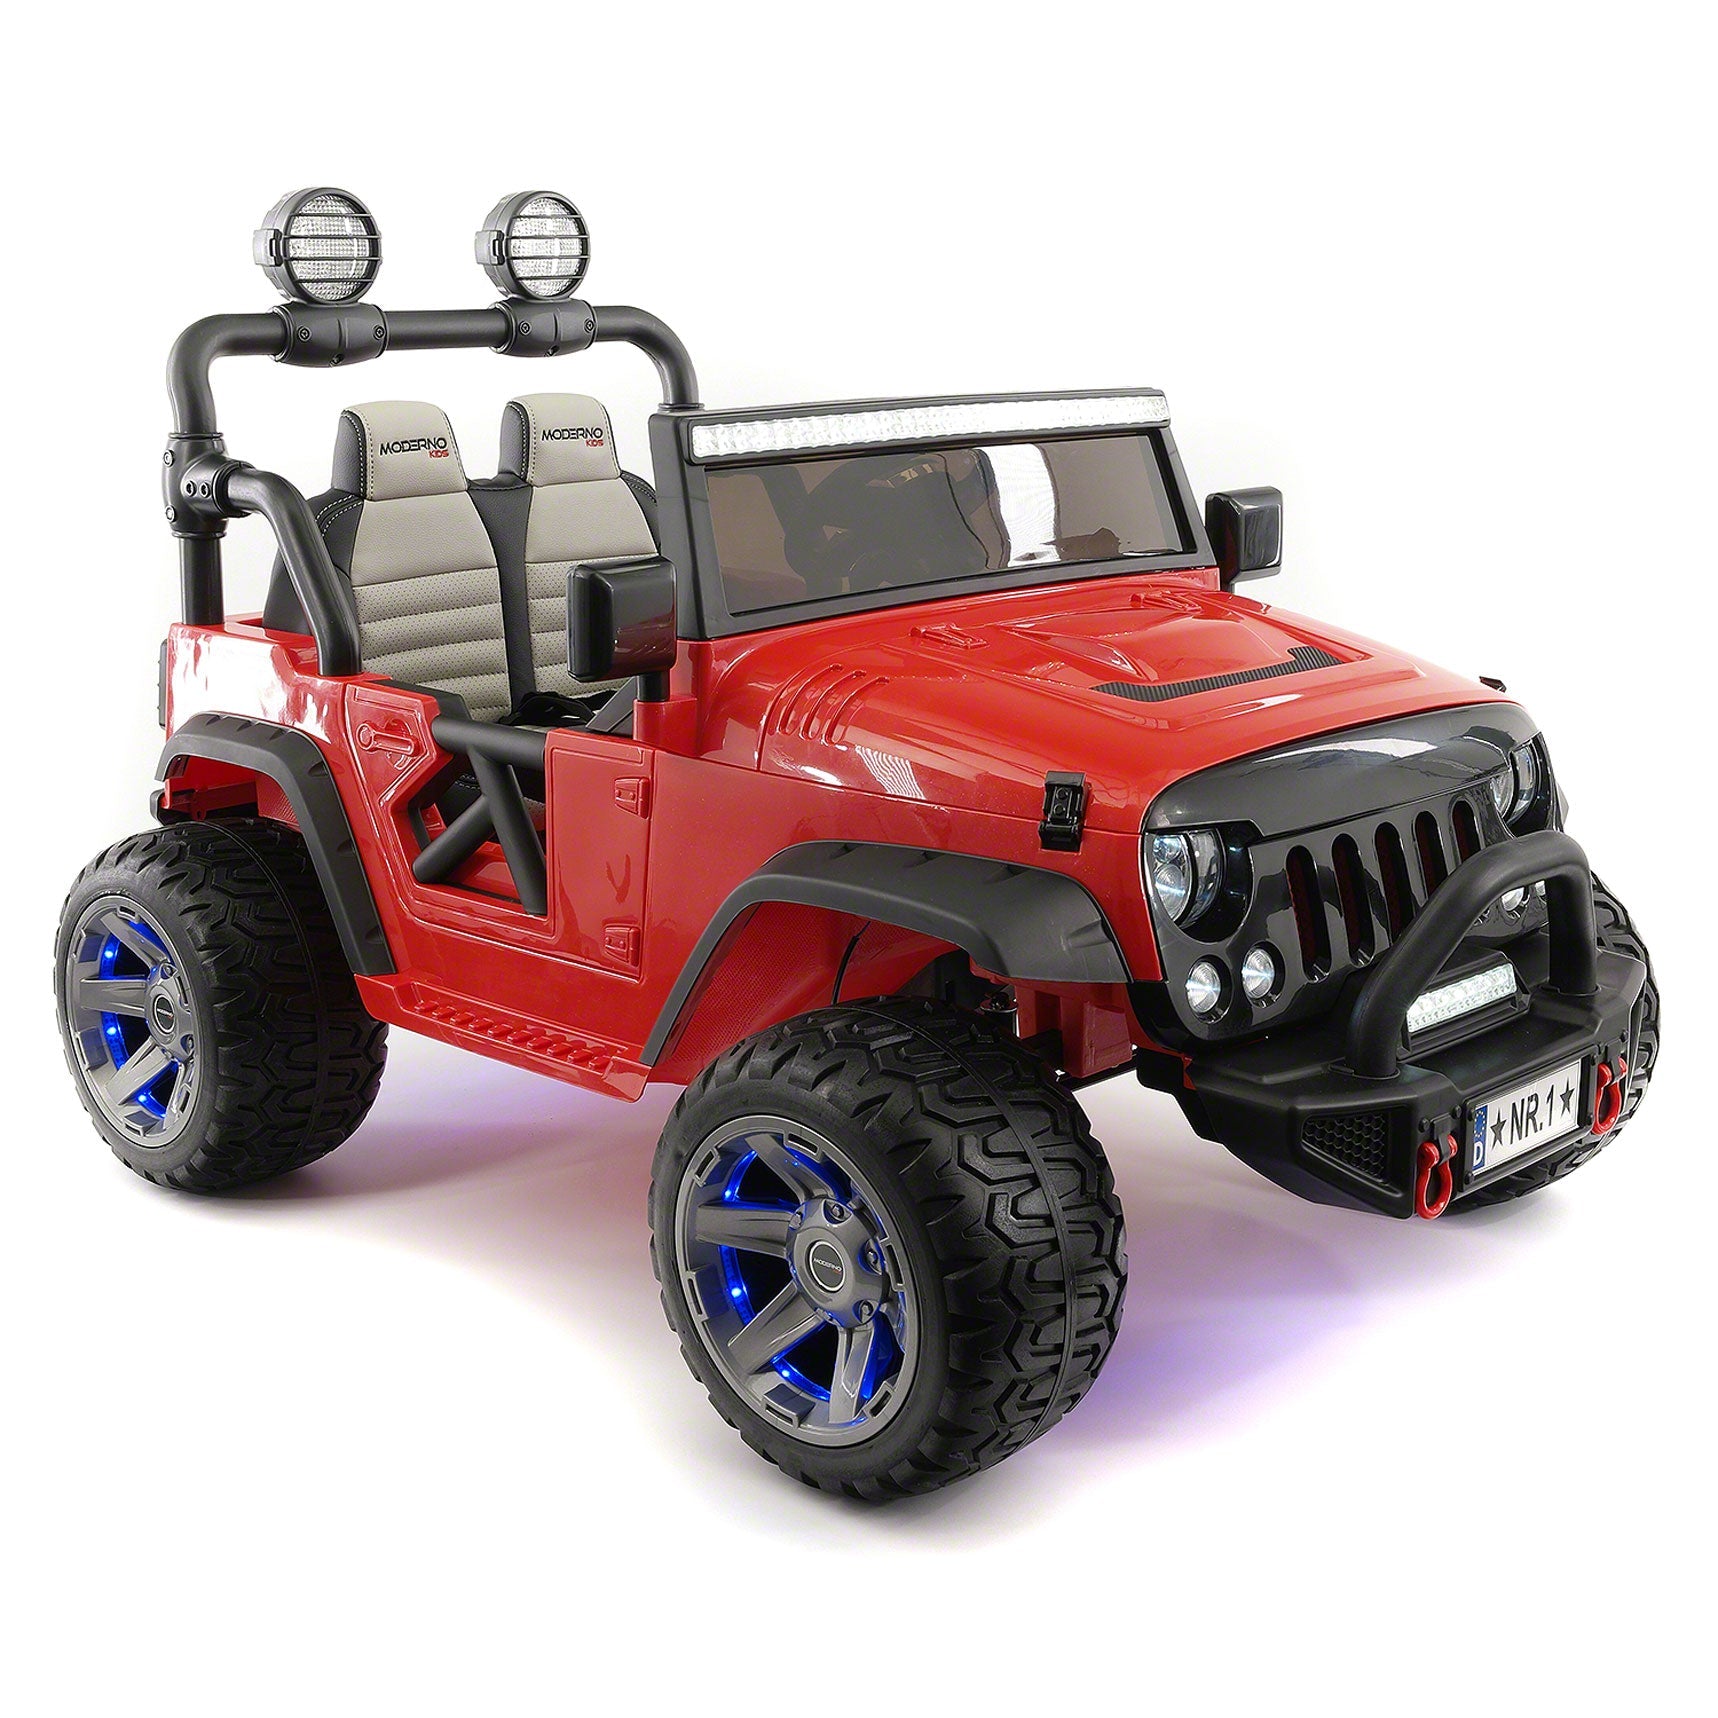 Trail Explorer 12v Kids Ride-on Car Truck With R/c Parental Remote | Cherry Red